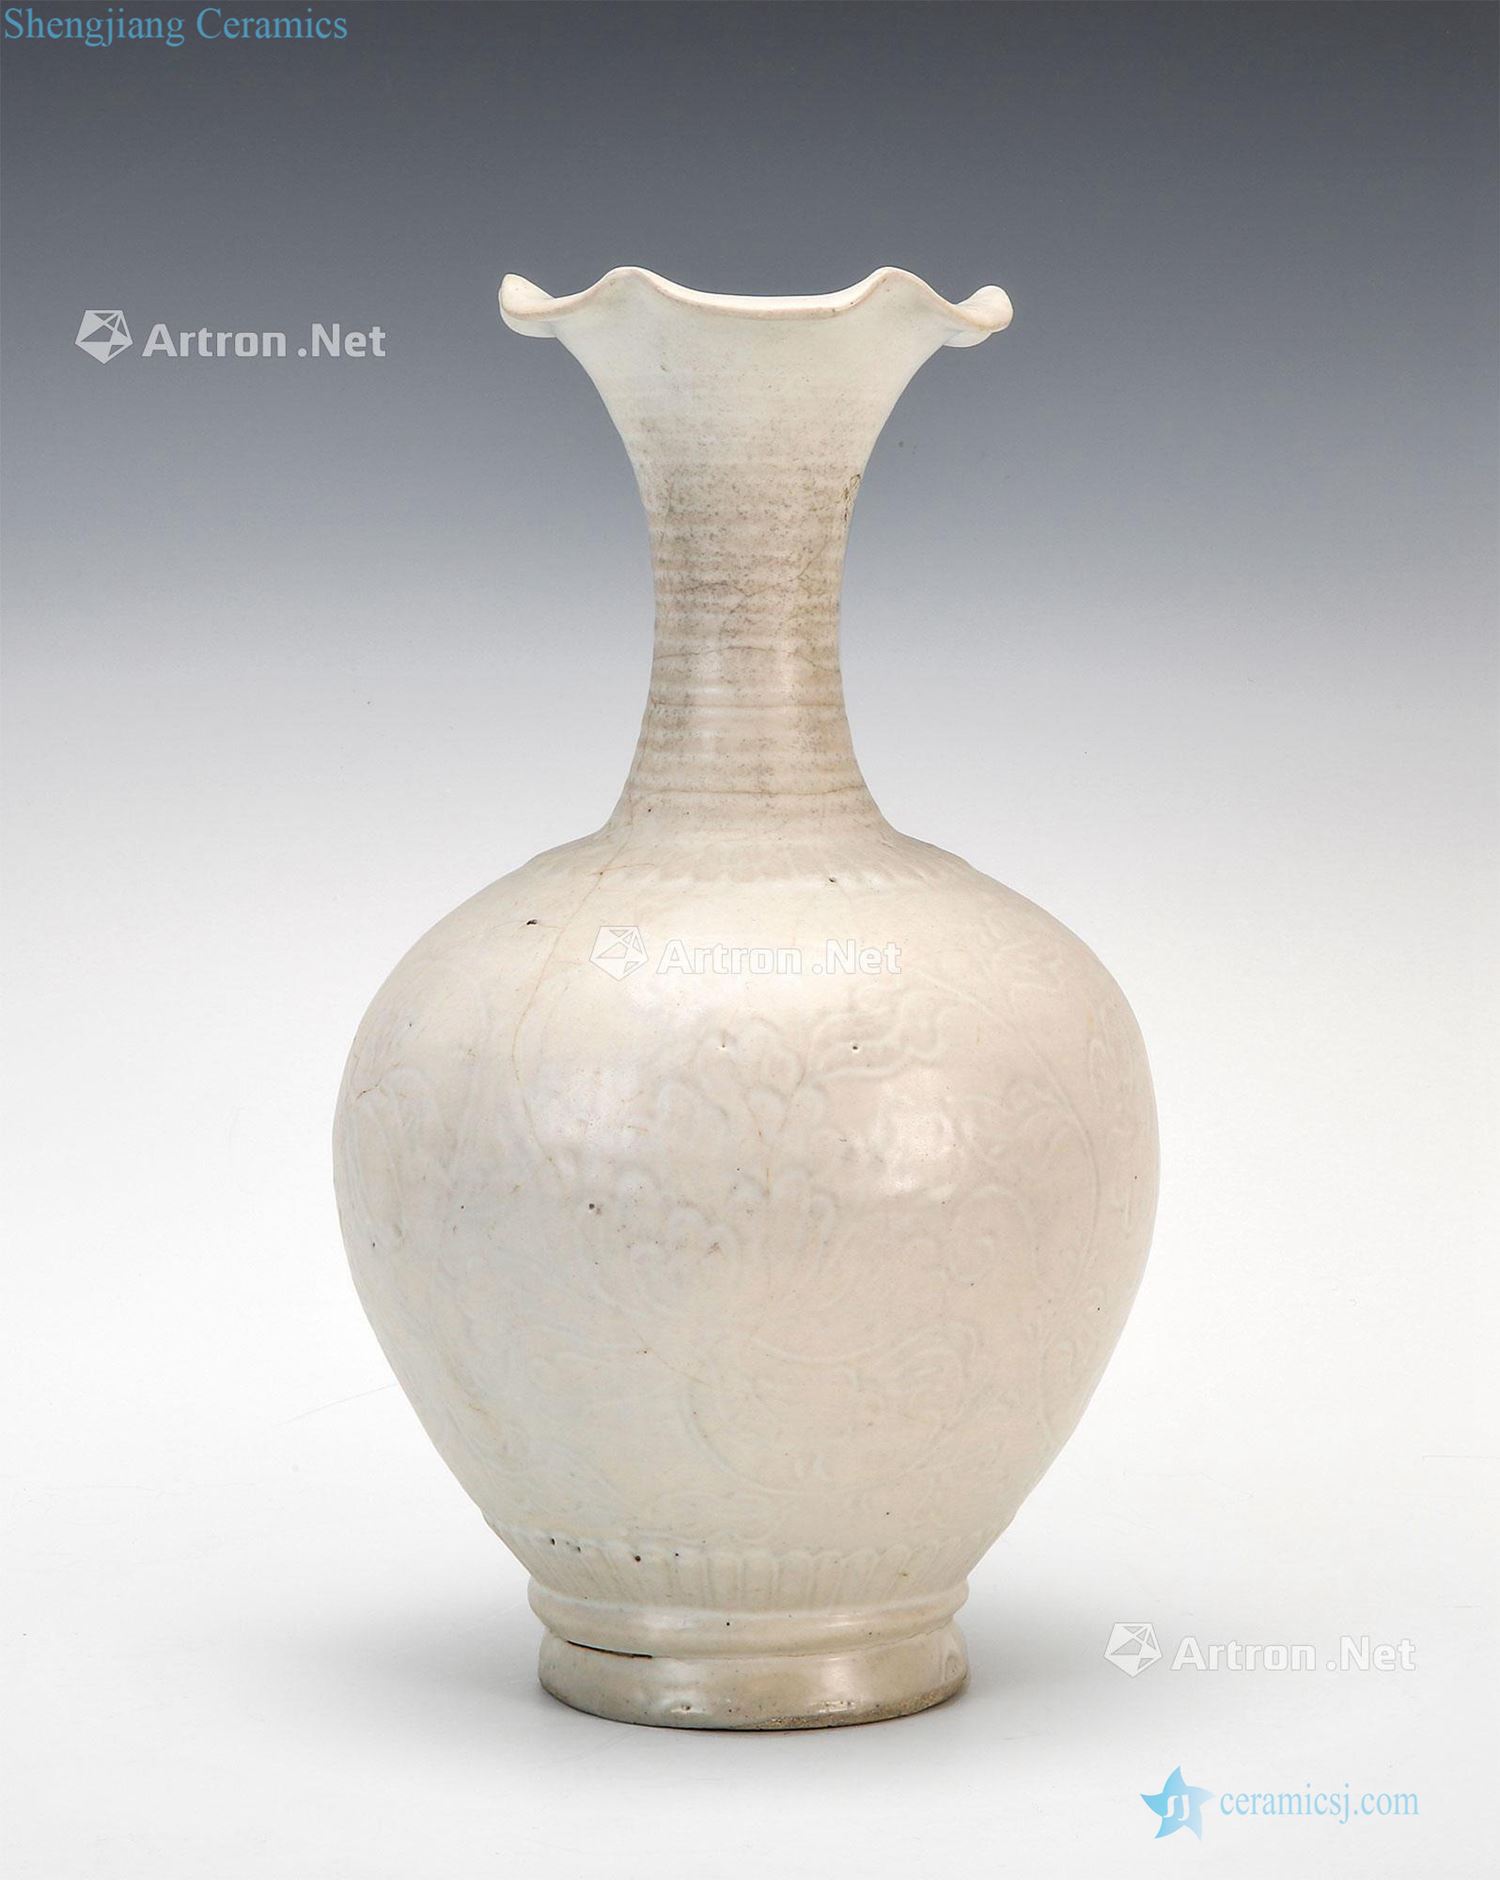 The song dynasty Craft flower bottle mouth